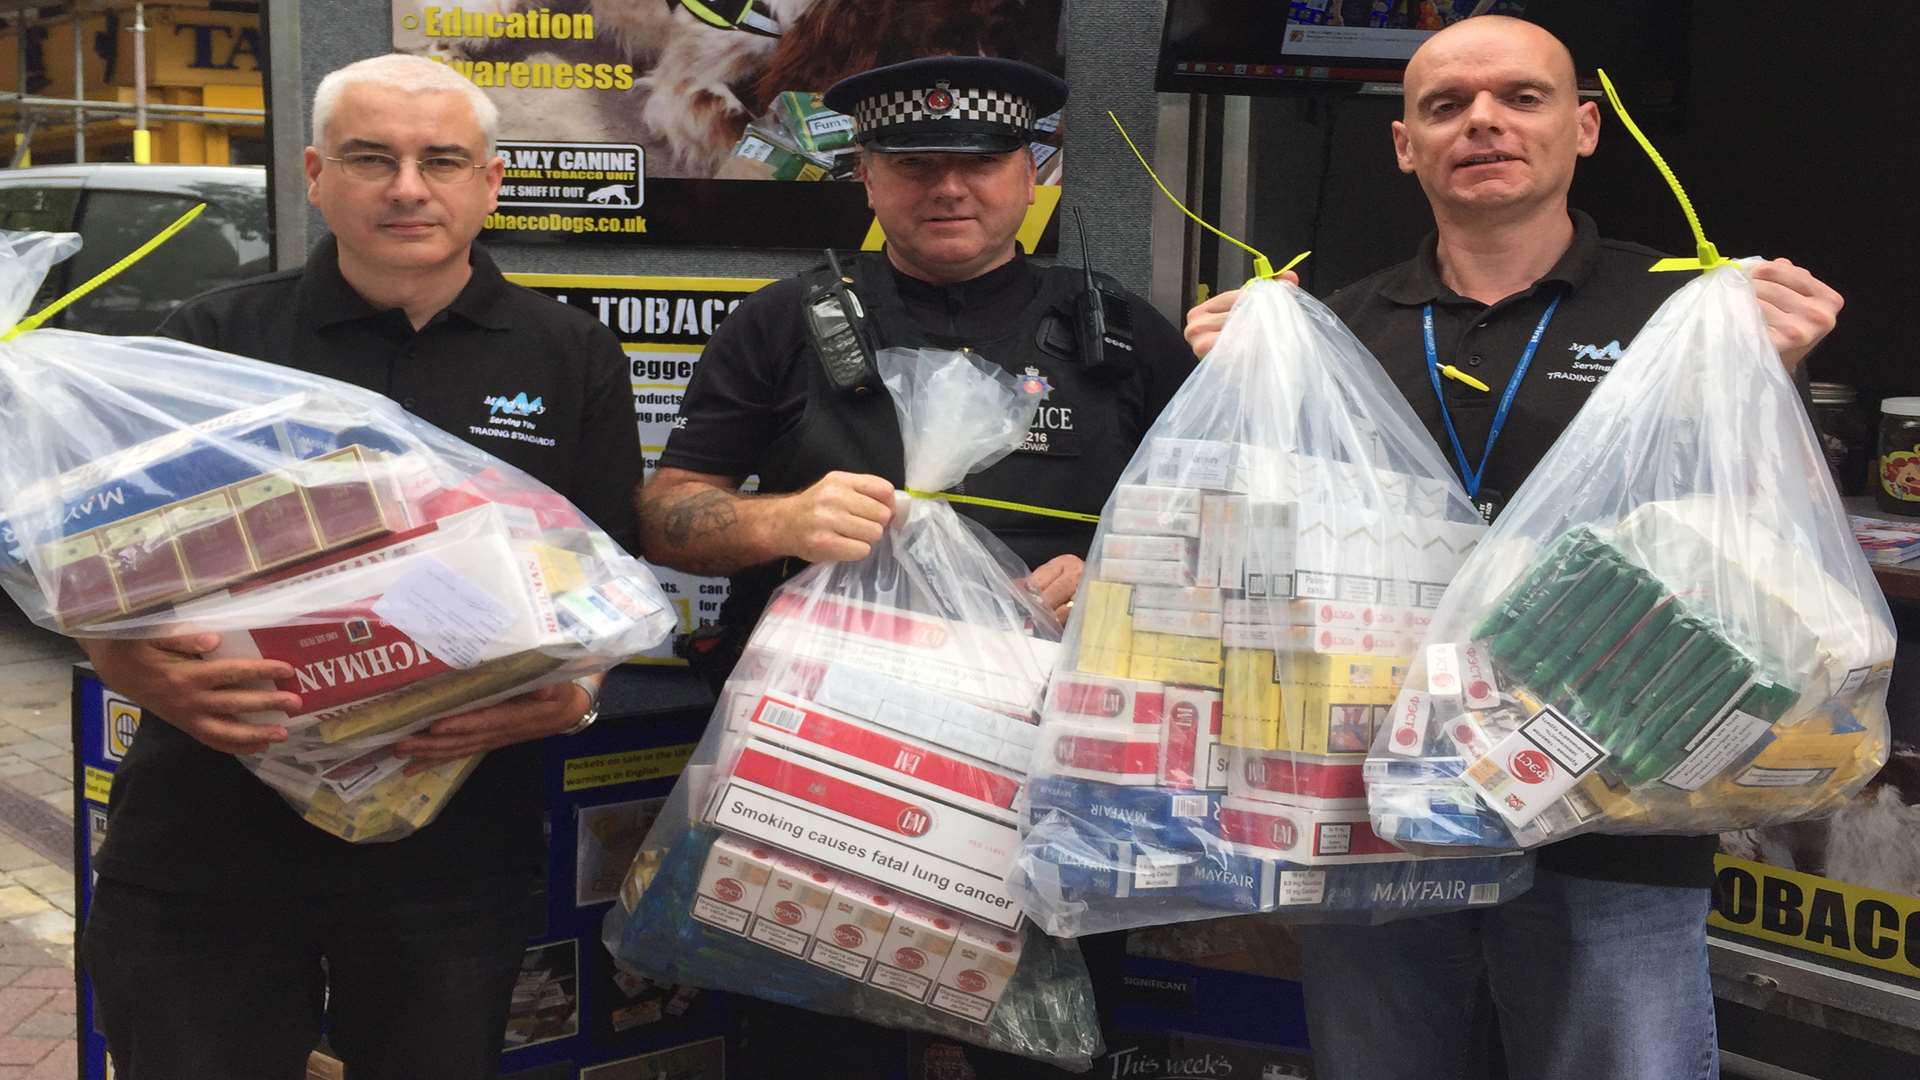 Ian Gilmore from Trading Standards (left) and PC Paul Riley (middle), with another Trading Standards officer